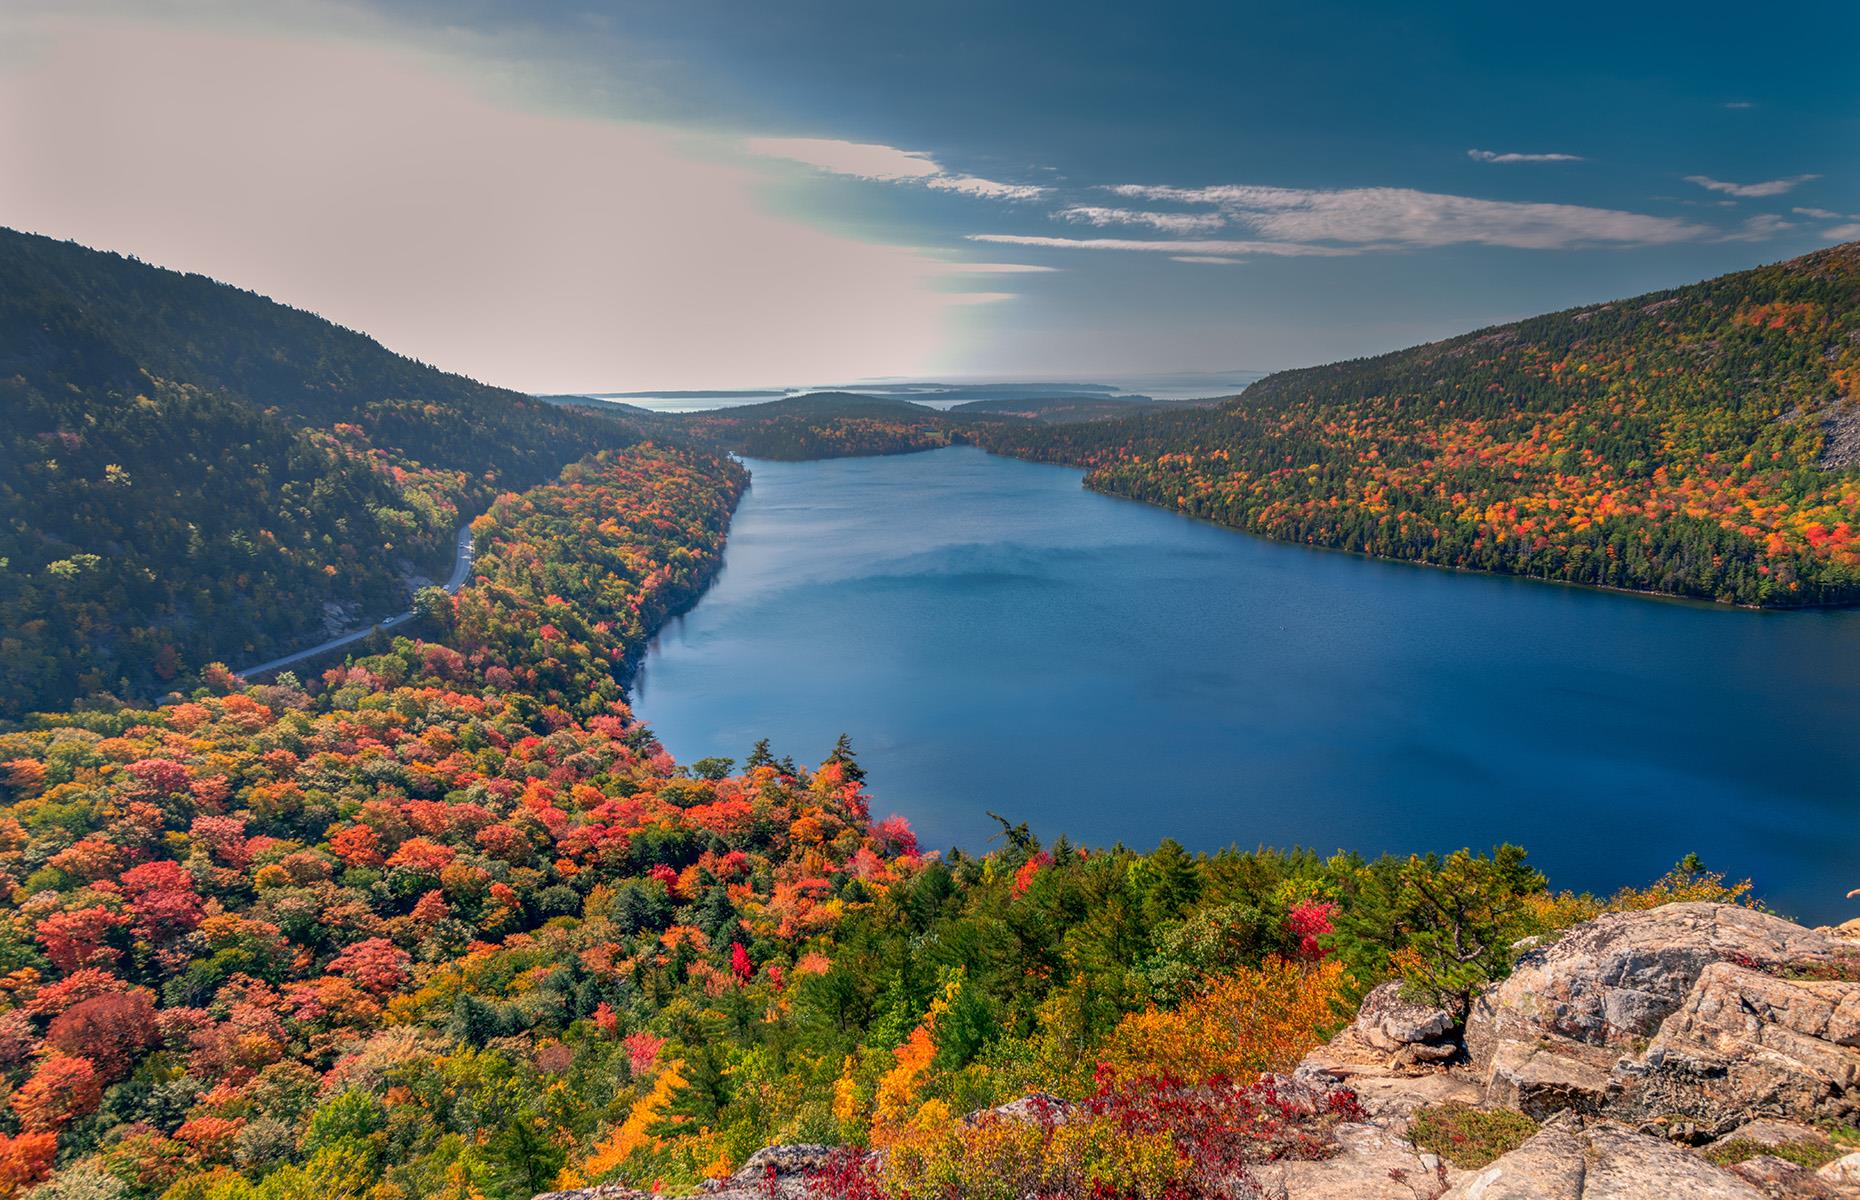 This 47,000-acre national park in Maine is best known for its granite peaks and forested hills, but its name has an interesting backstory. Although, "names" is more accurate, as this park has been renamed numerous times. Originally called Sieur de Monts National Monument, then renamed in 1919 to Lafayette National Park, its name today has French roots.